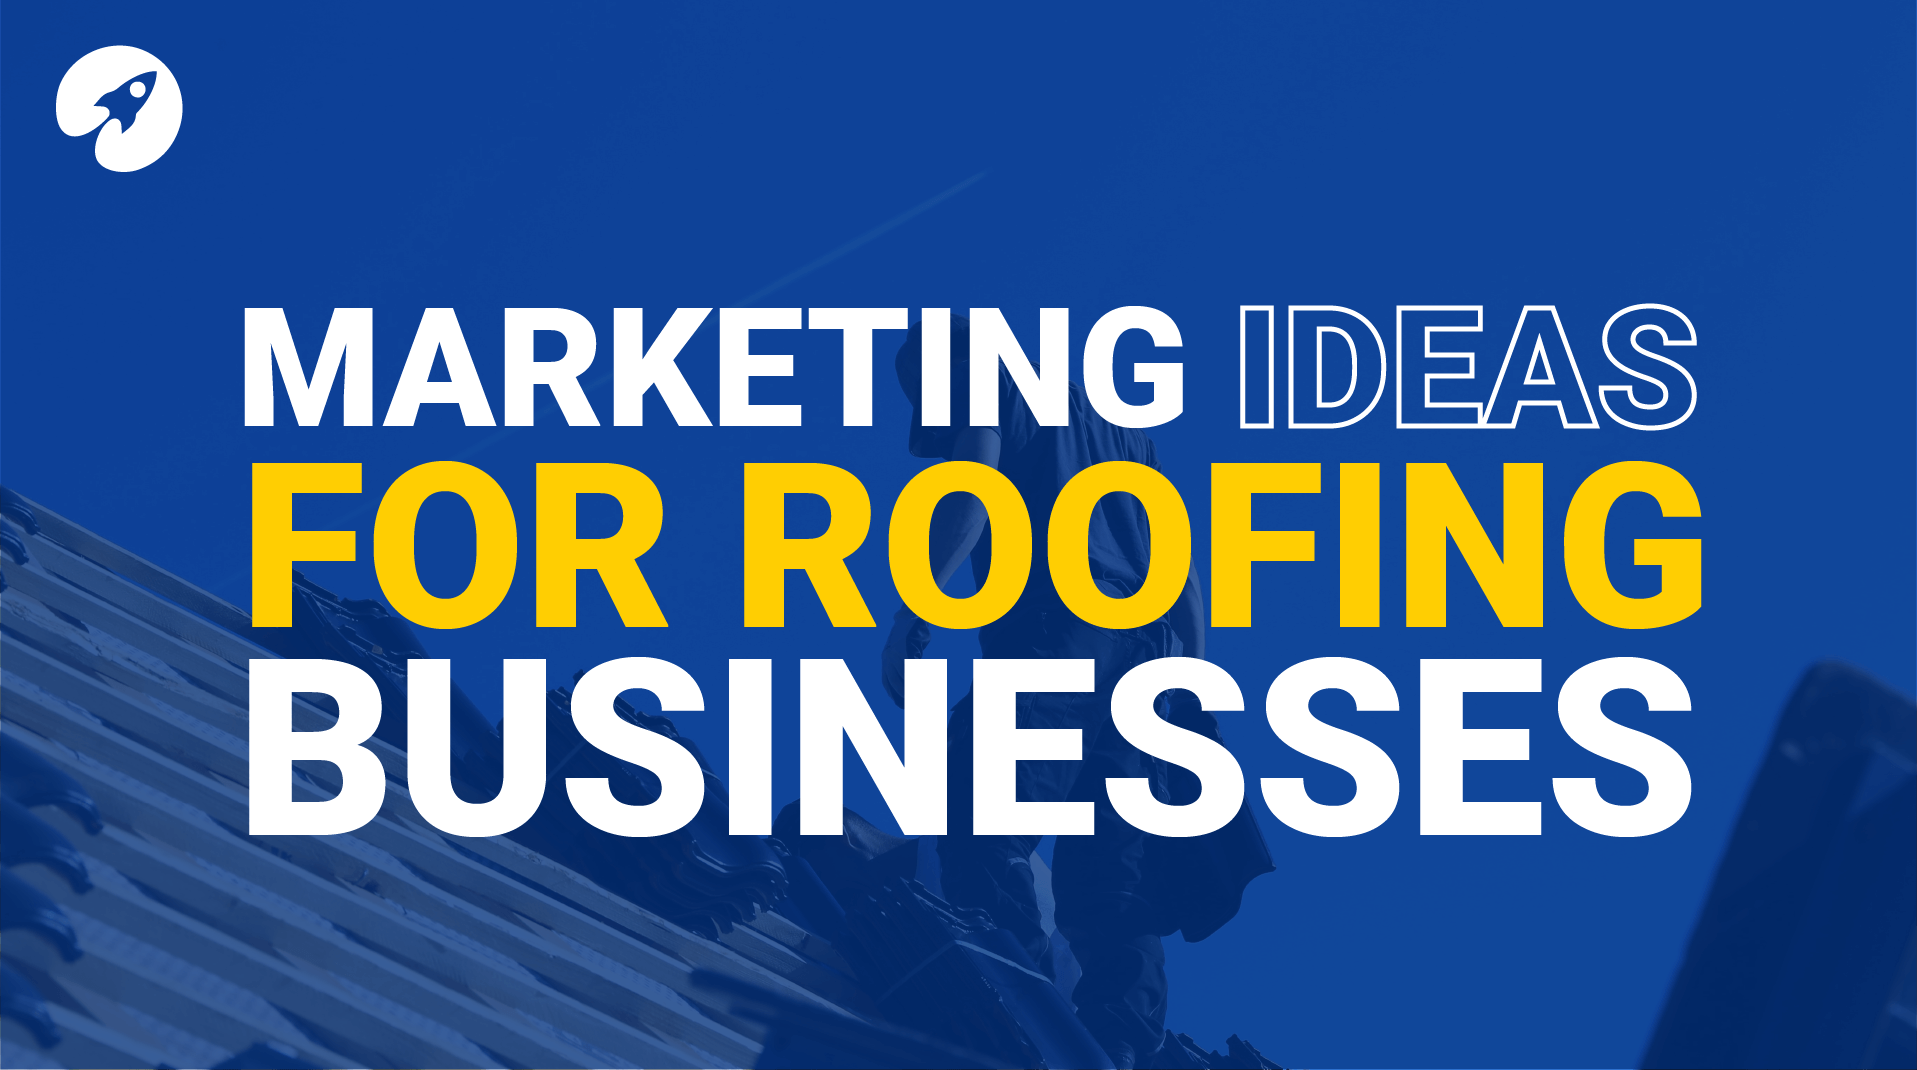 Roofing marketing